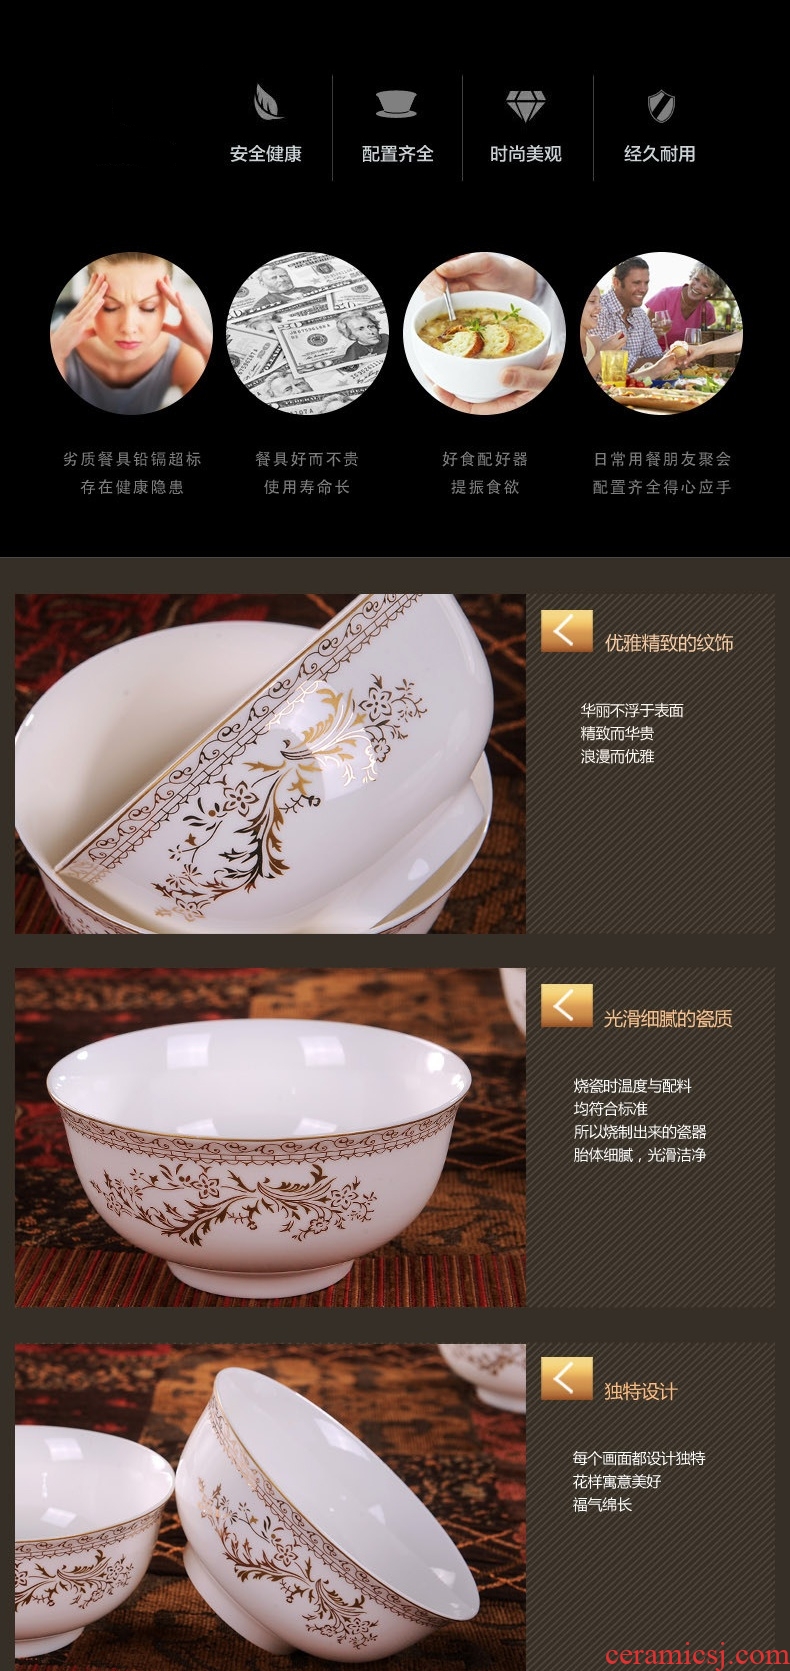 Jingdezhen ceramic bowl 10 a to home for dinner dishes suit 5 inches Europe type rice bowls a single large rainbow noodle bowl